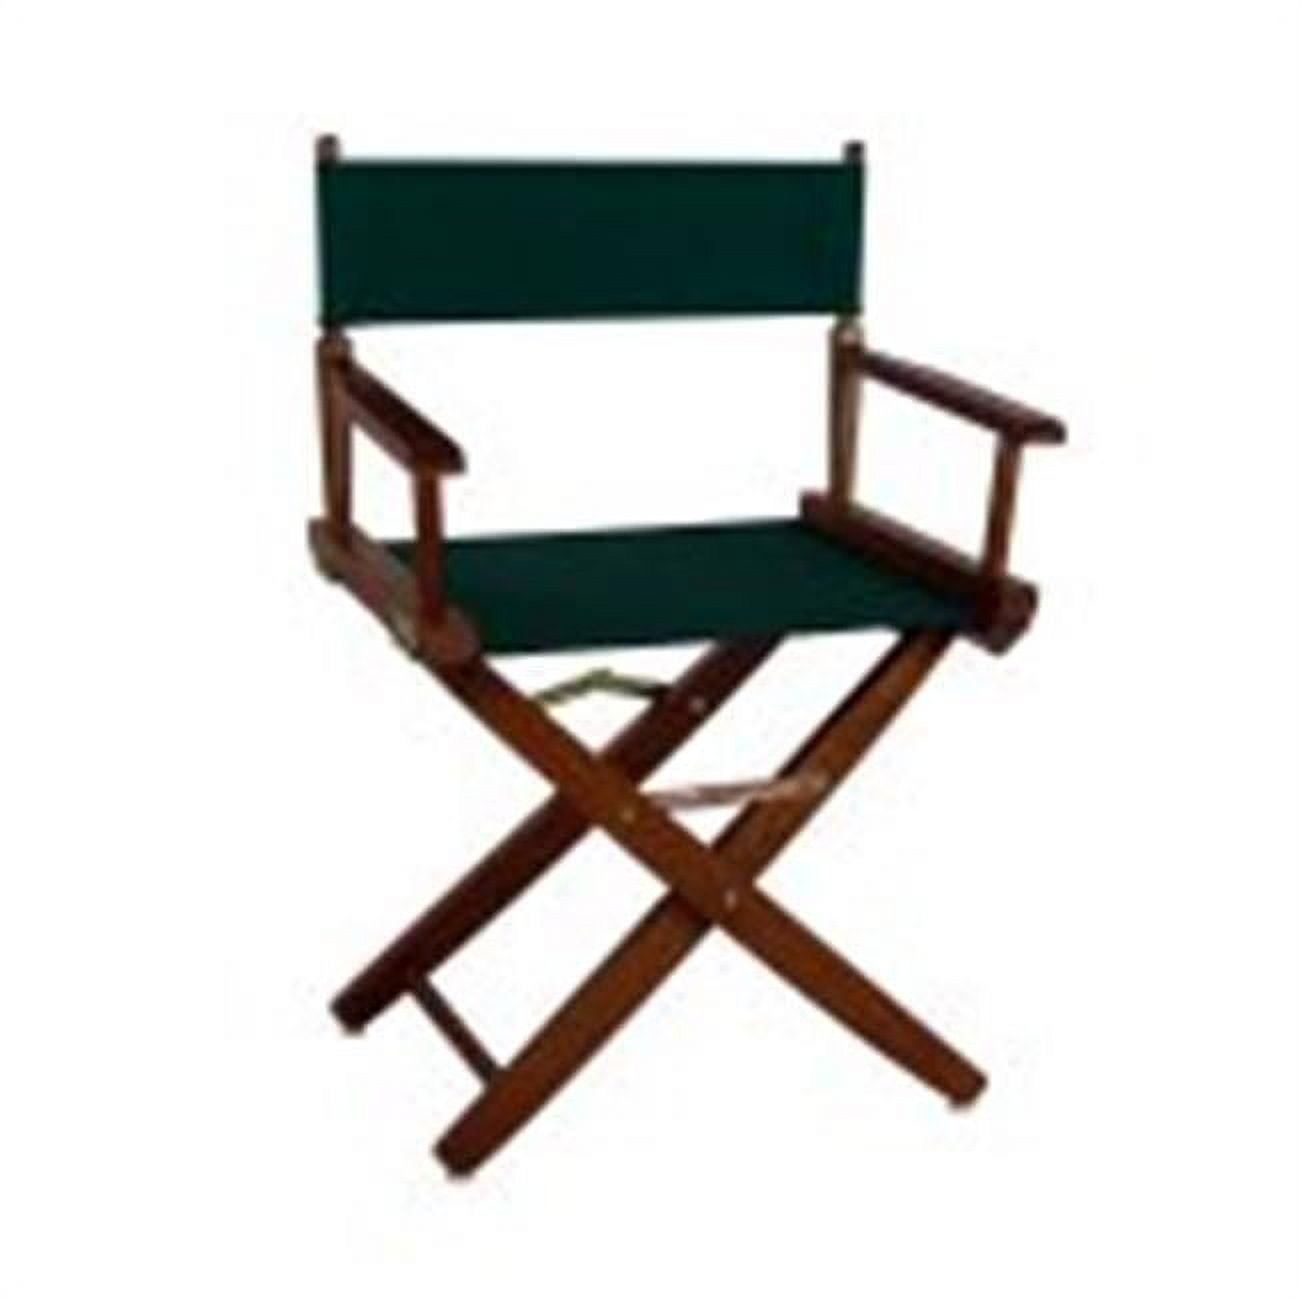 Mission Oak American Hardwood Foldable Chair with Arm Rest in Off-White